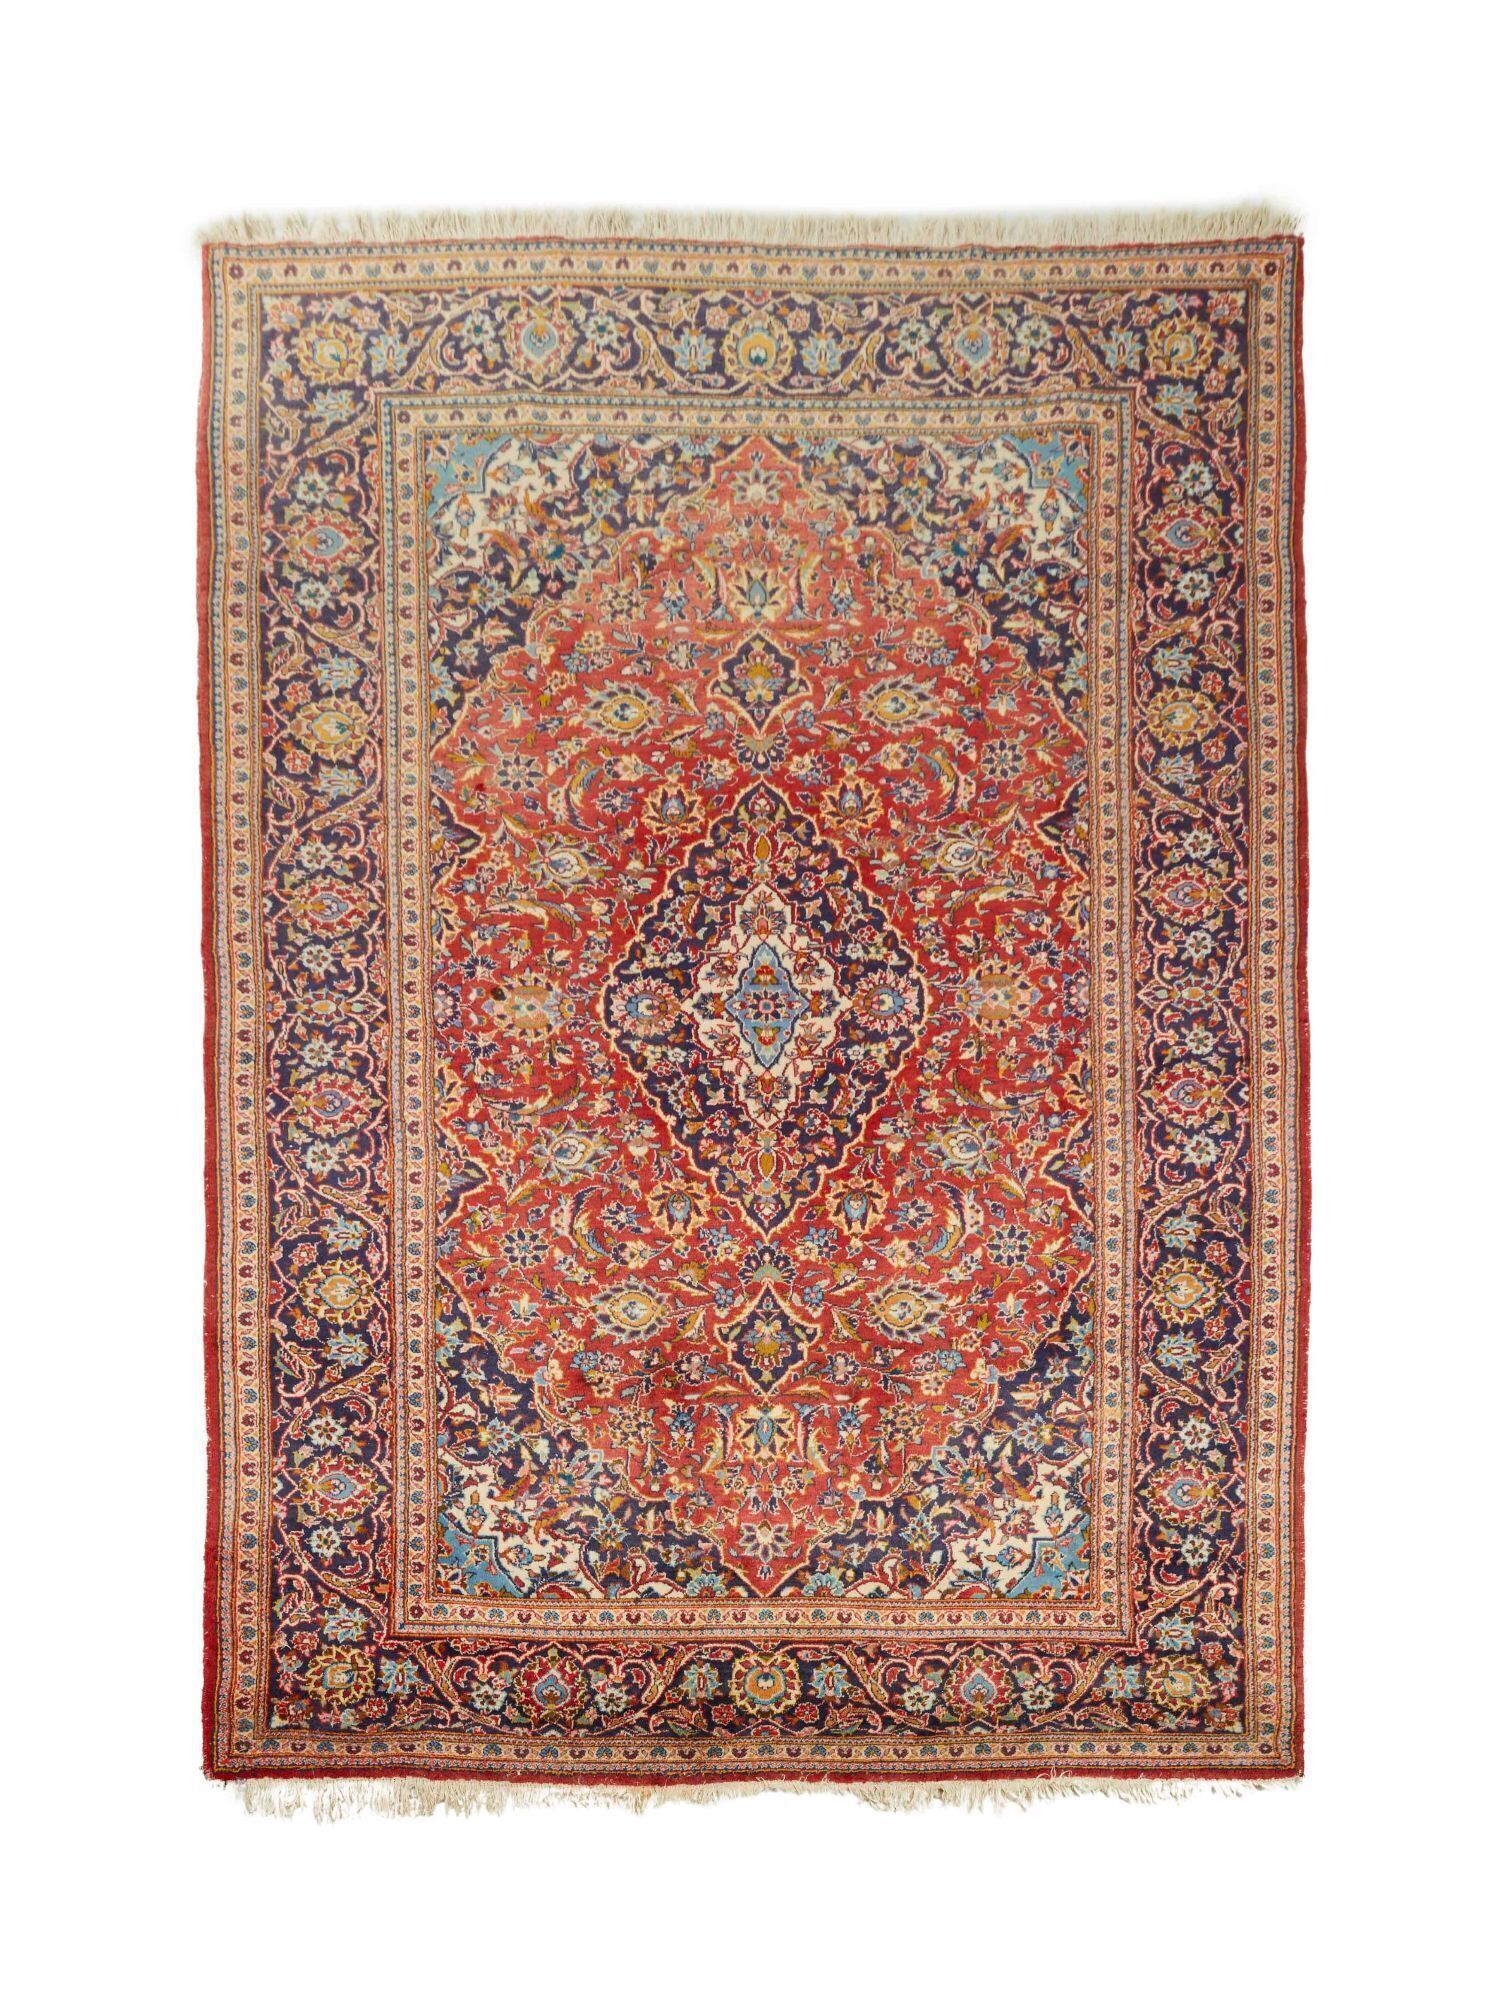 Persian-style rug